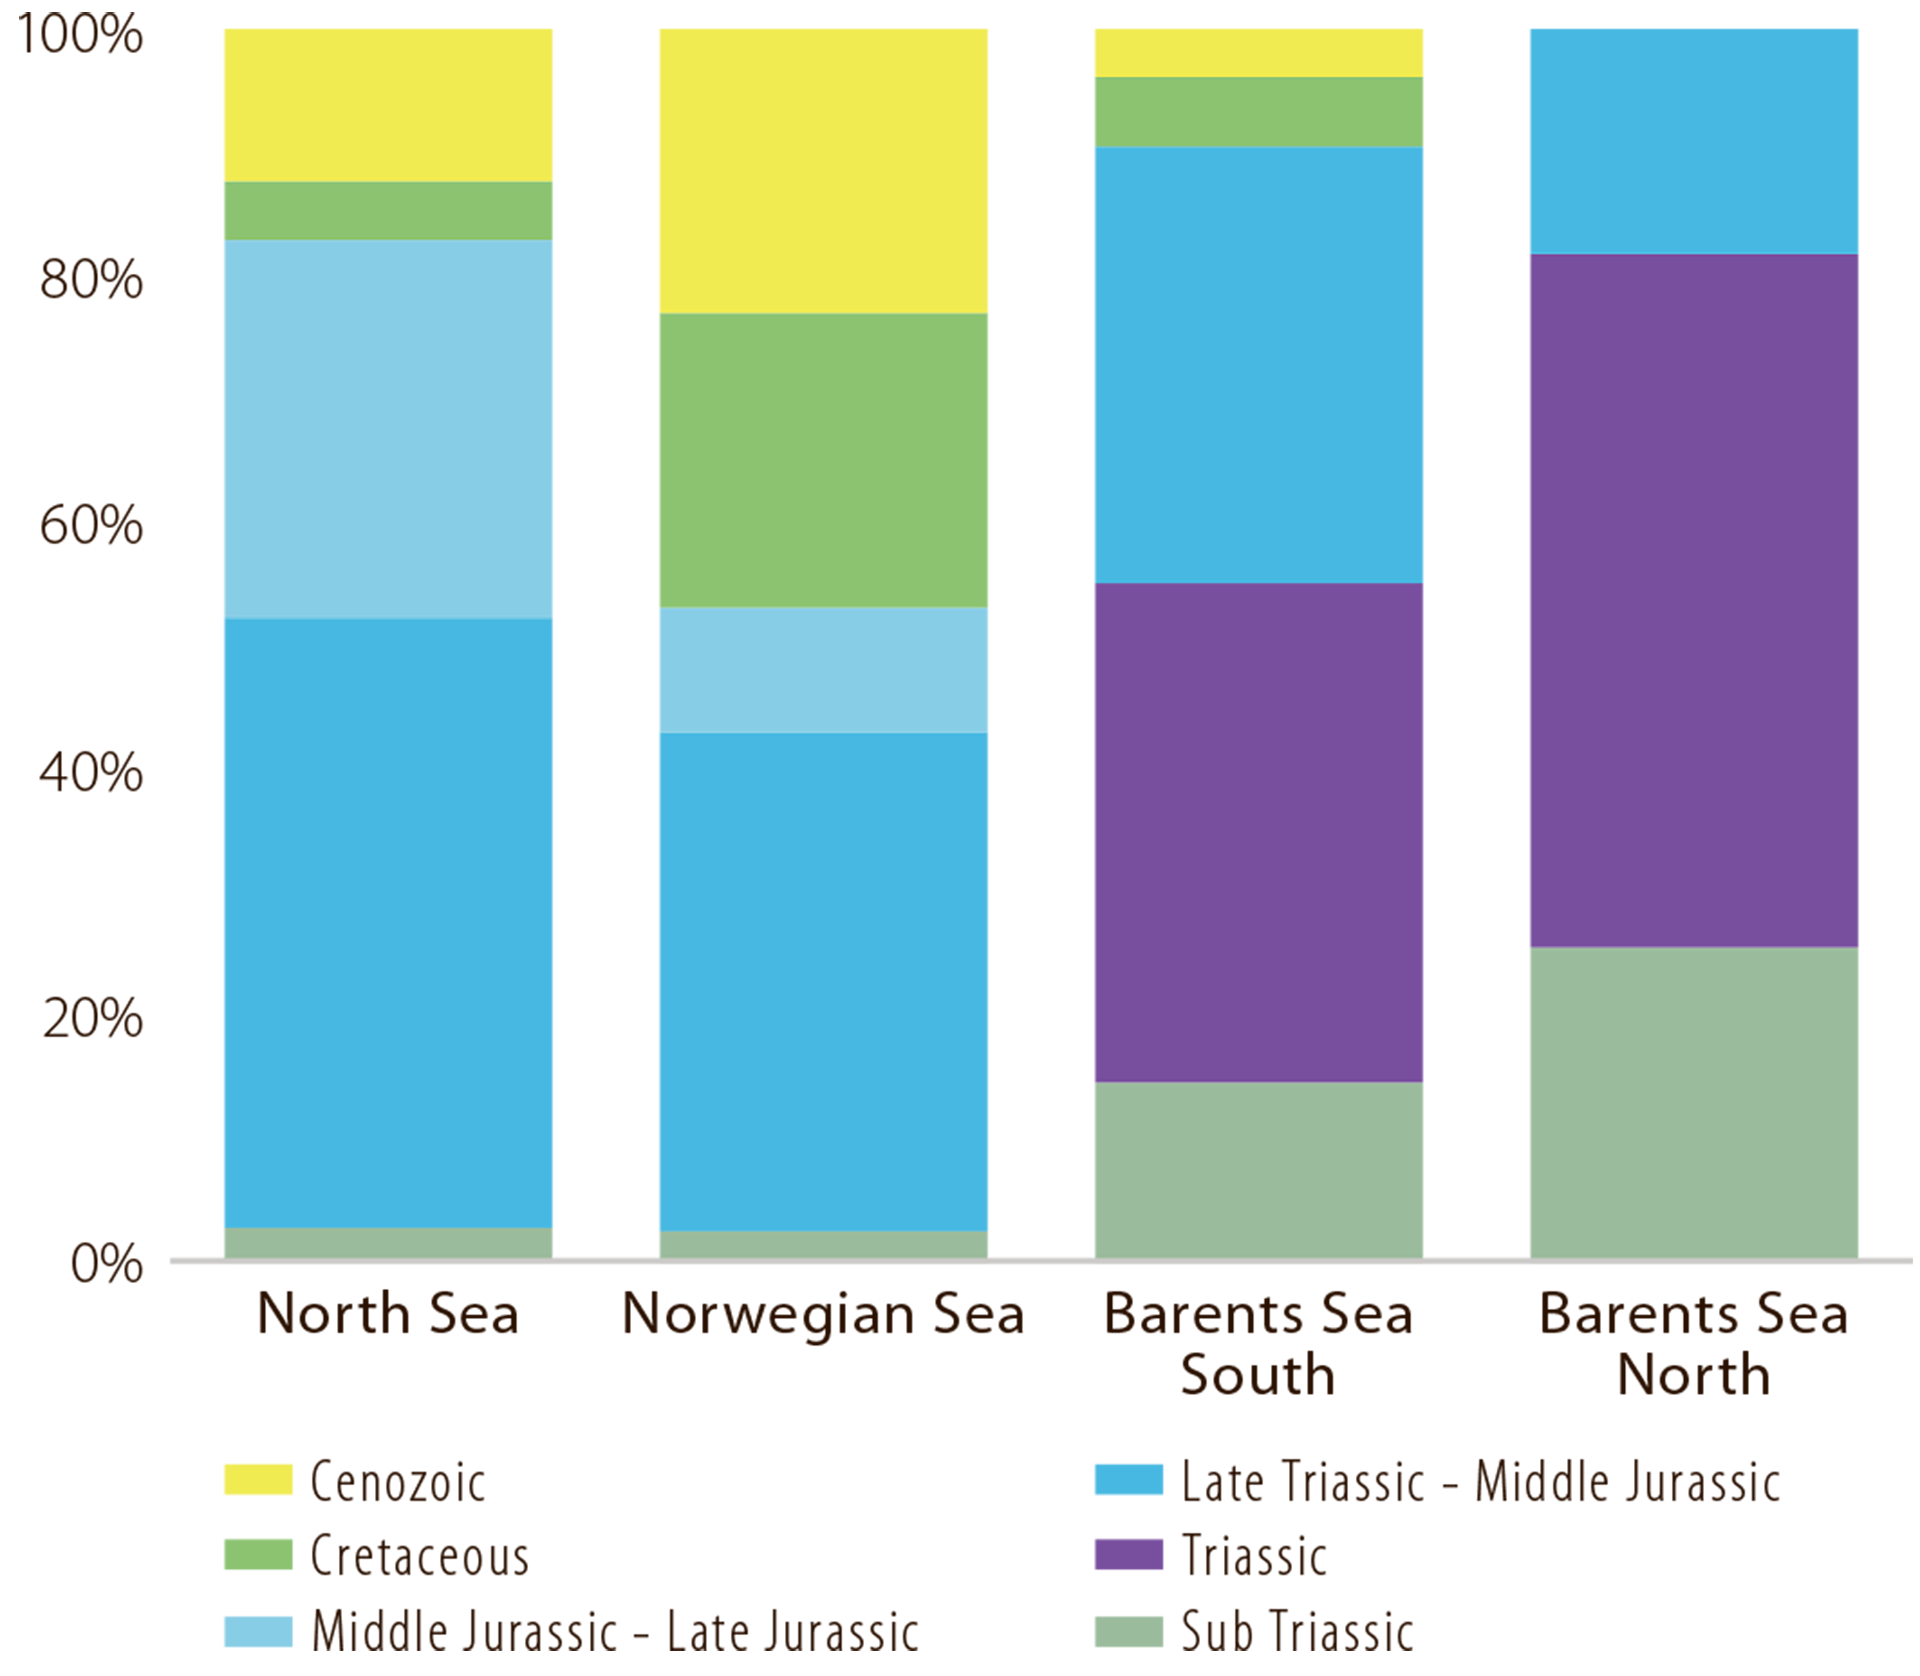 Figure 3.6 Recoverable undiscovered resources in each area by stratigraphic level. The percentage distribution reflects the geological development in each area.